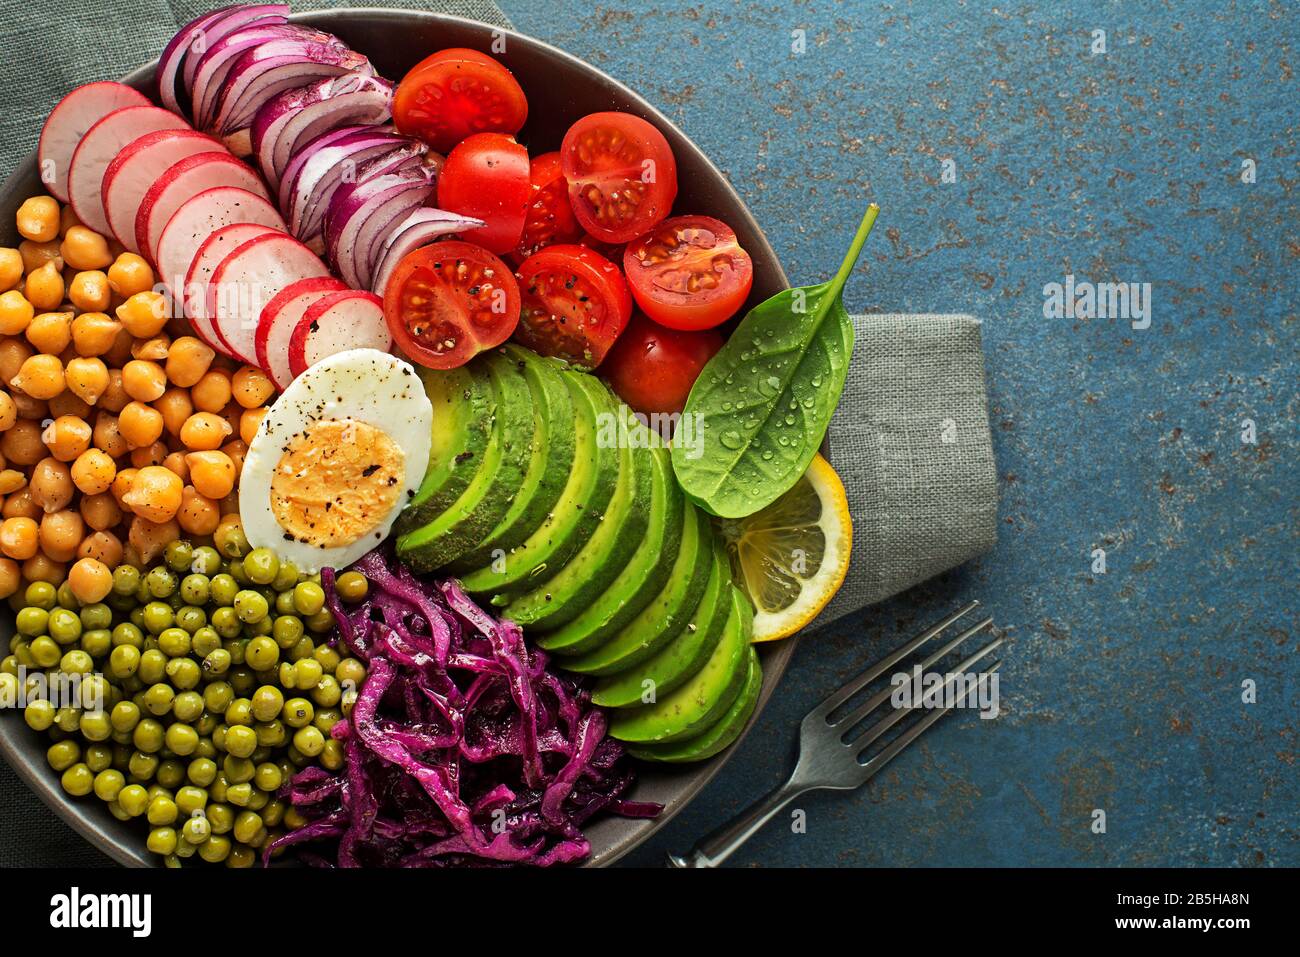 Healthy vegan lunch bowl. Avocado, chickpeas, tomato, red cabbage, green peas, red onion and radish vegetables salad. Healthy balanced vegetarian food Stock Photo